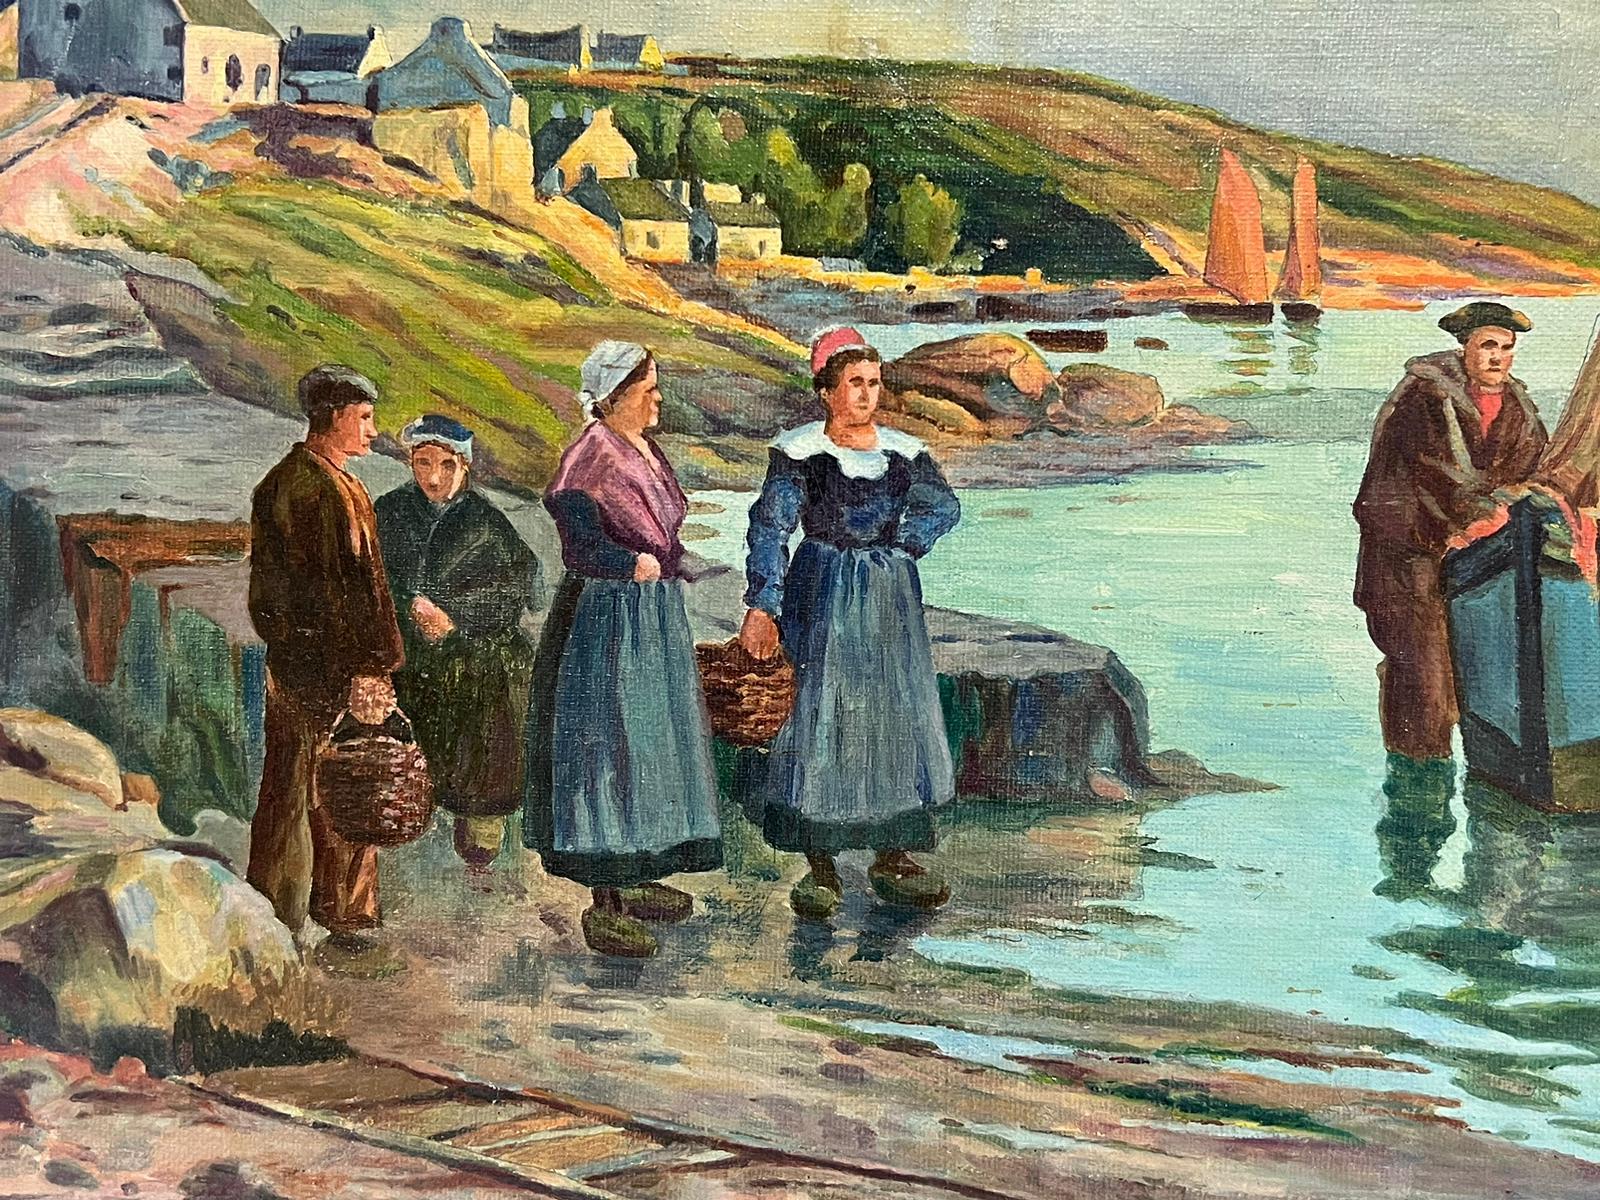 Breton Fisherfolk on the Shore
French School, early 1900's
signed with initials HB
oil on canvas, unframed
canvas: 15.5 x 20 inches
provenance: private collection, France
condition: very good and sound condition except for the area of paint loss